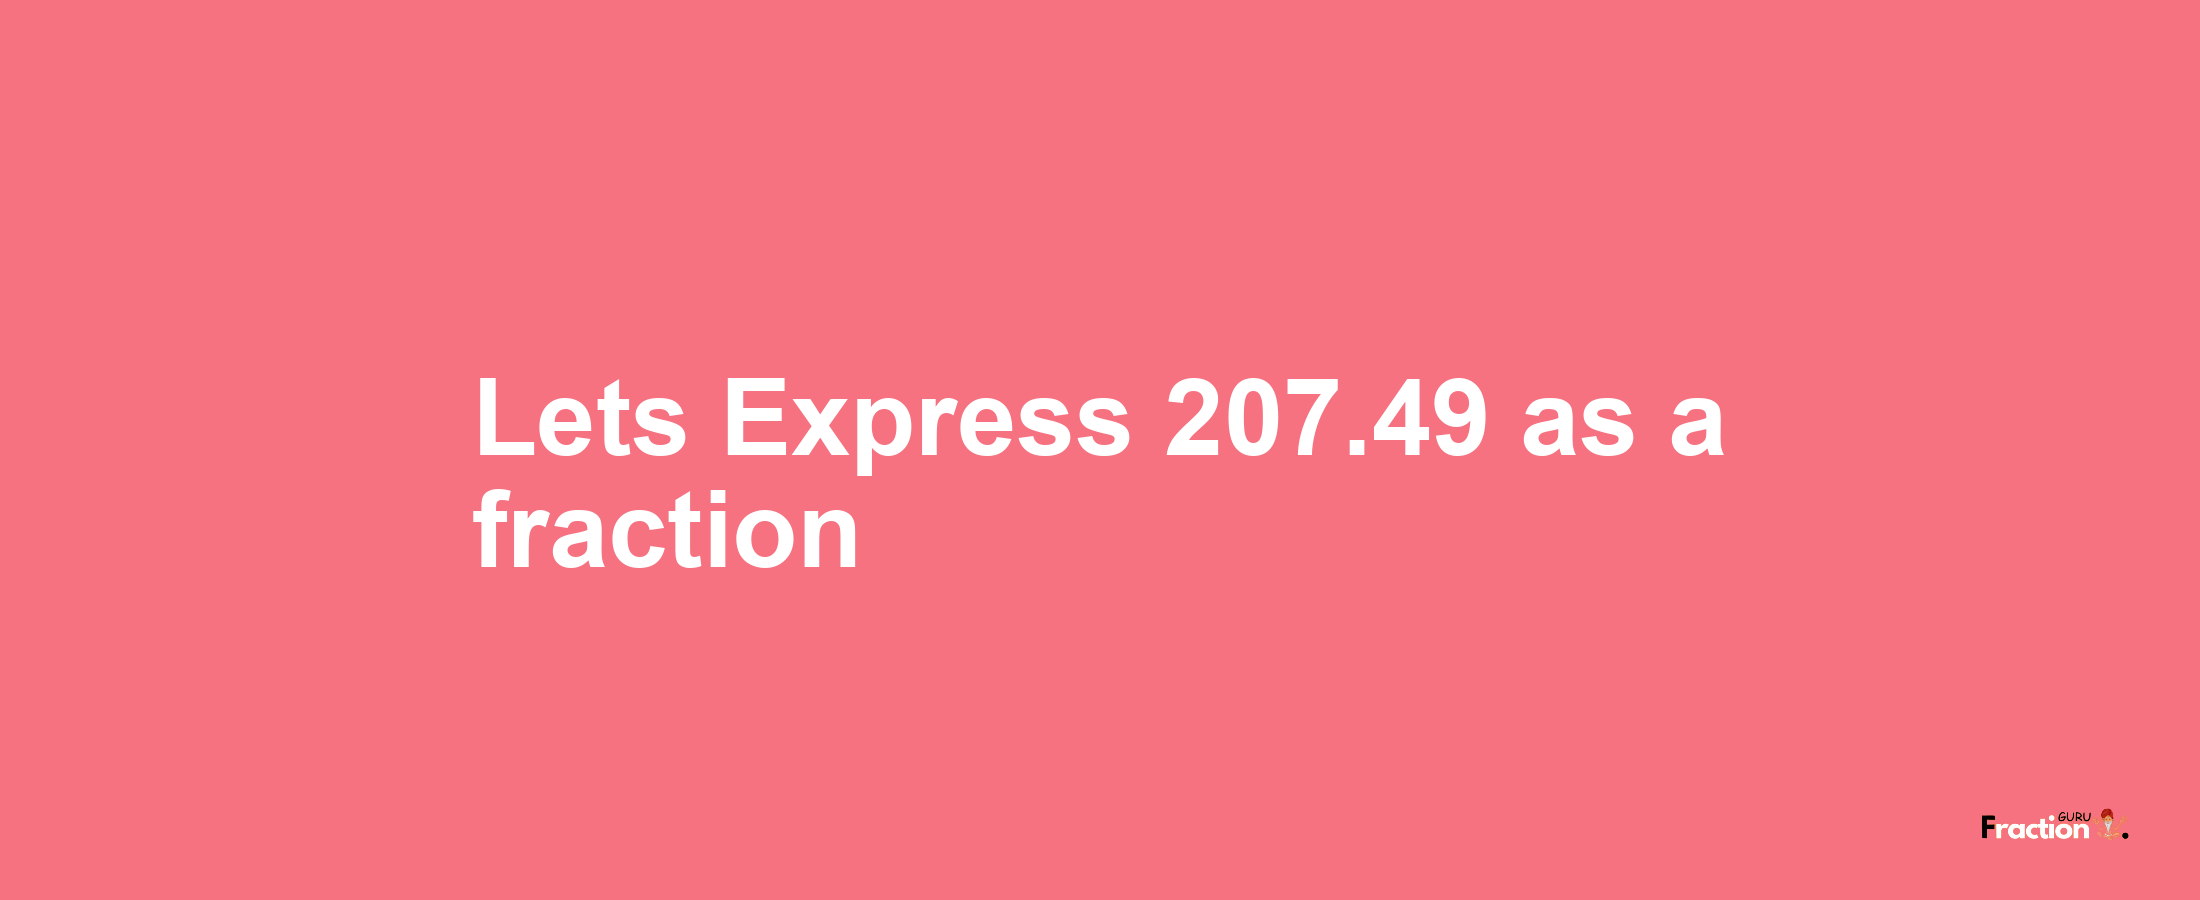 Lets Express 207.49 as afraction